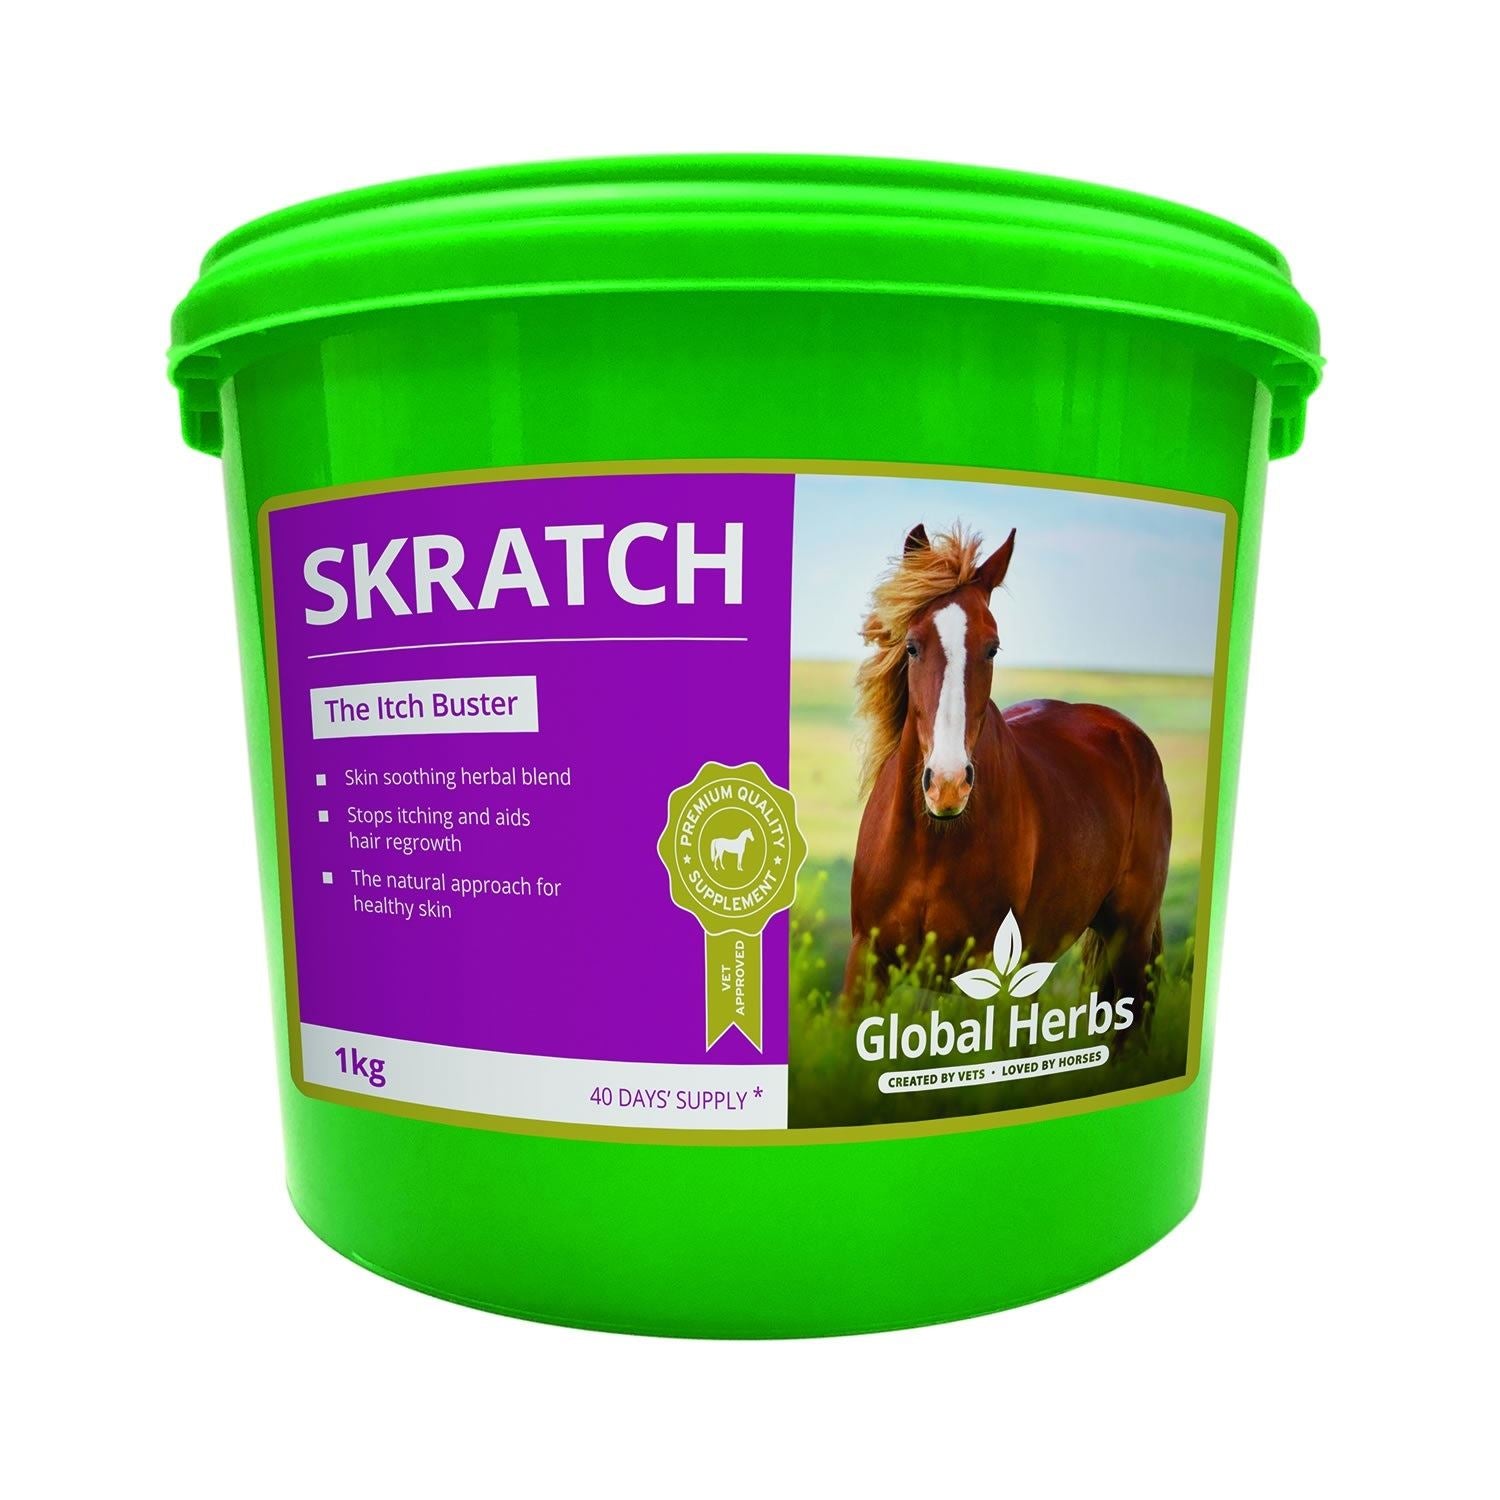 Global Herbs Superskratch - Just Horse Riders